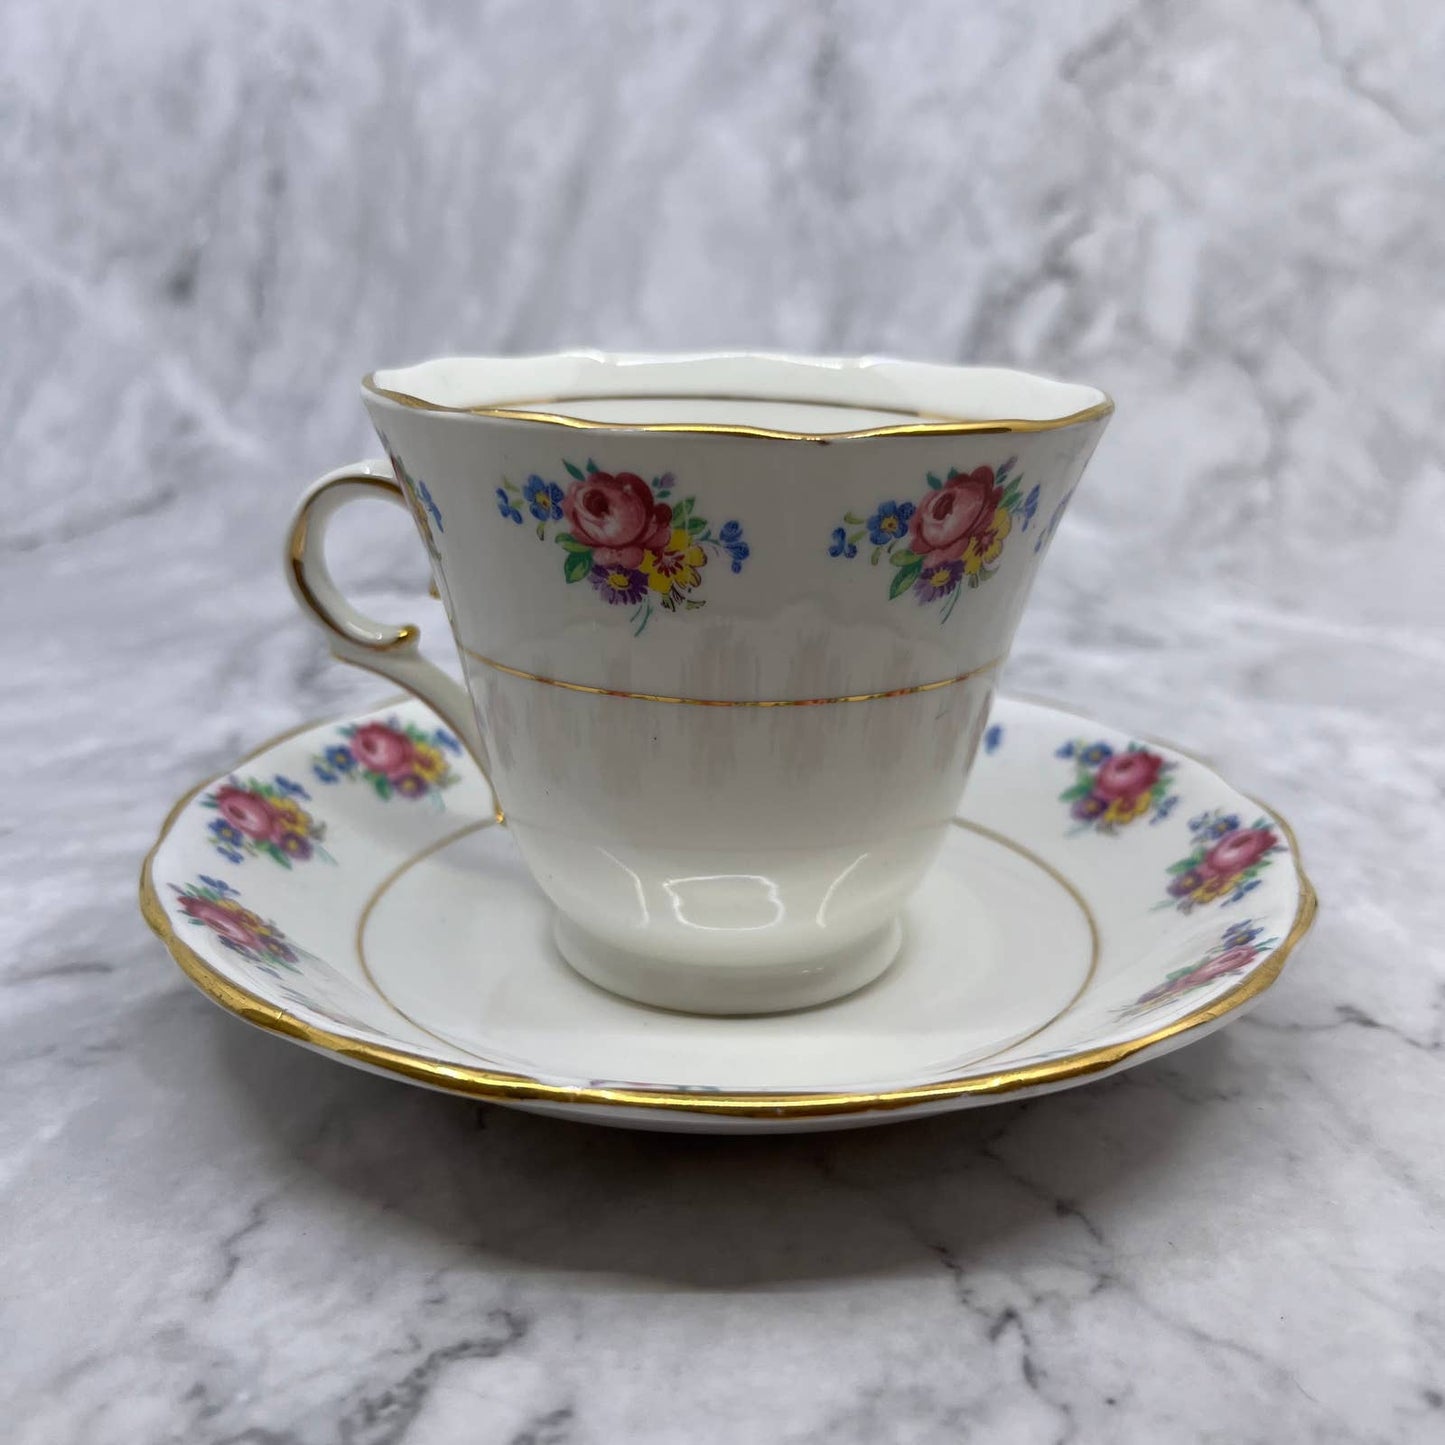 Colclough Teacup and Saucer Spring Bouquet Floral Pattern Bone China TD1